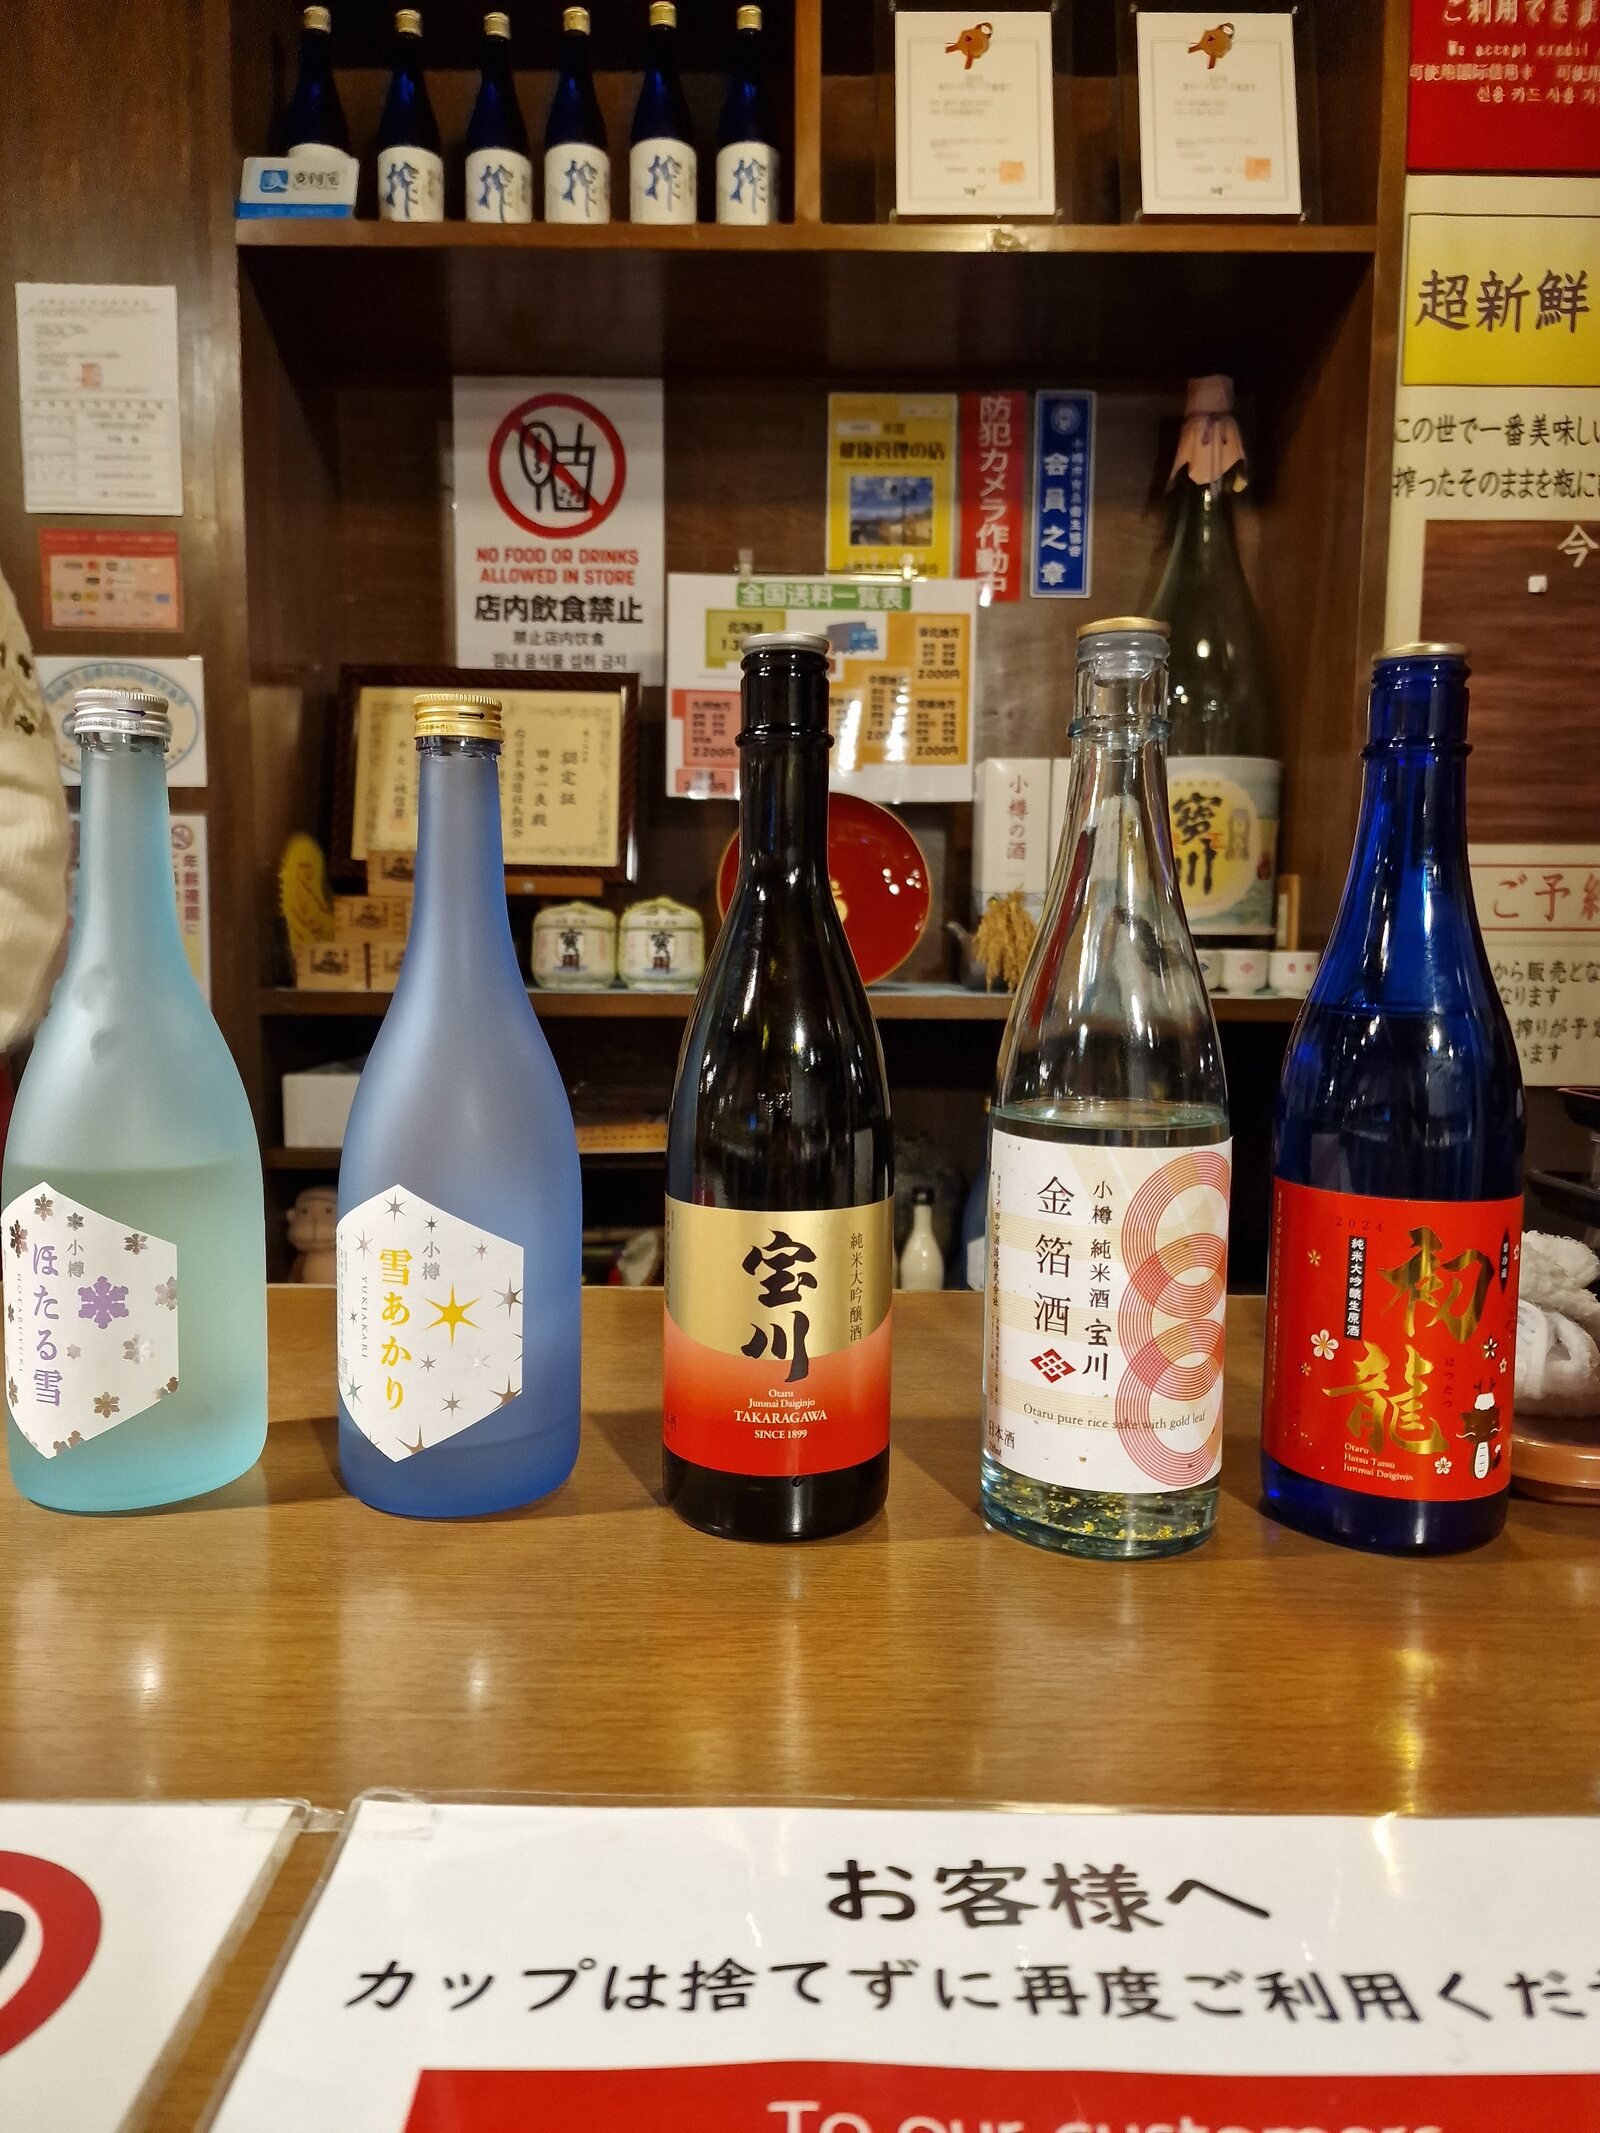 5 different sake bottles lined up on a table